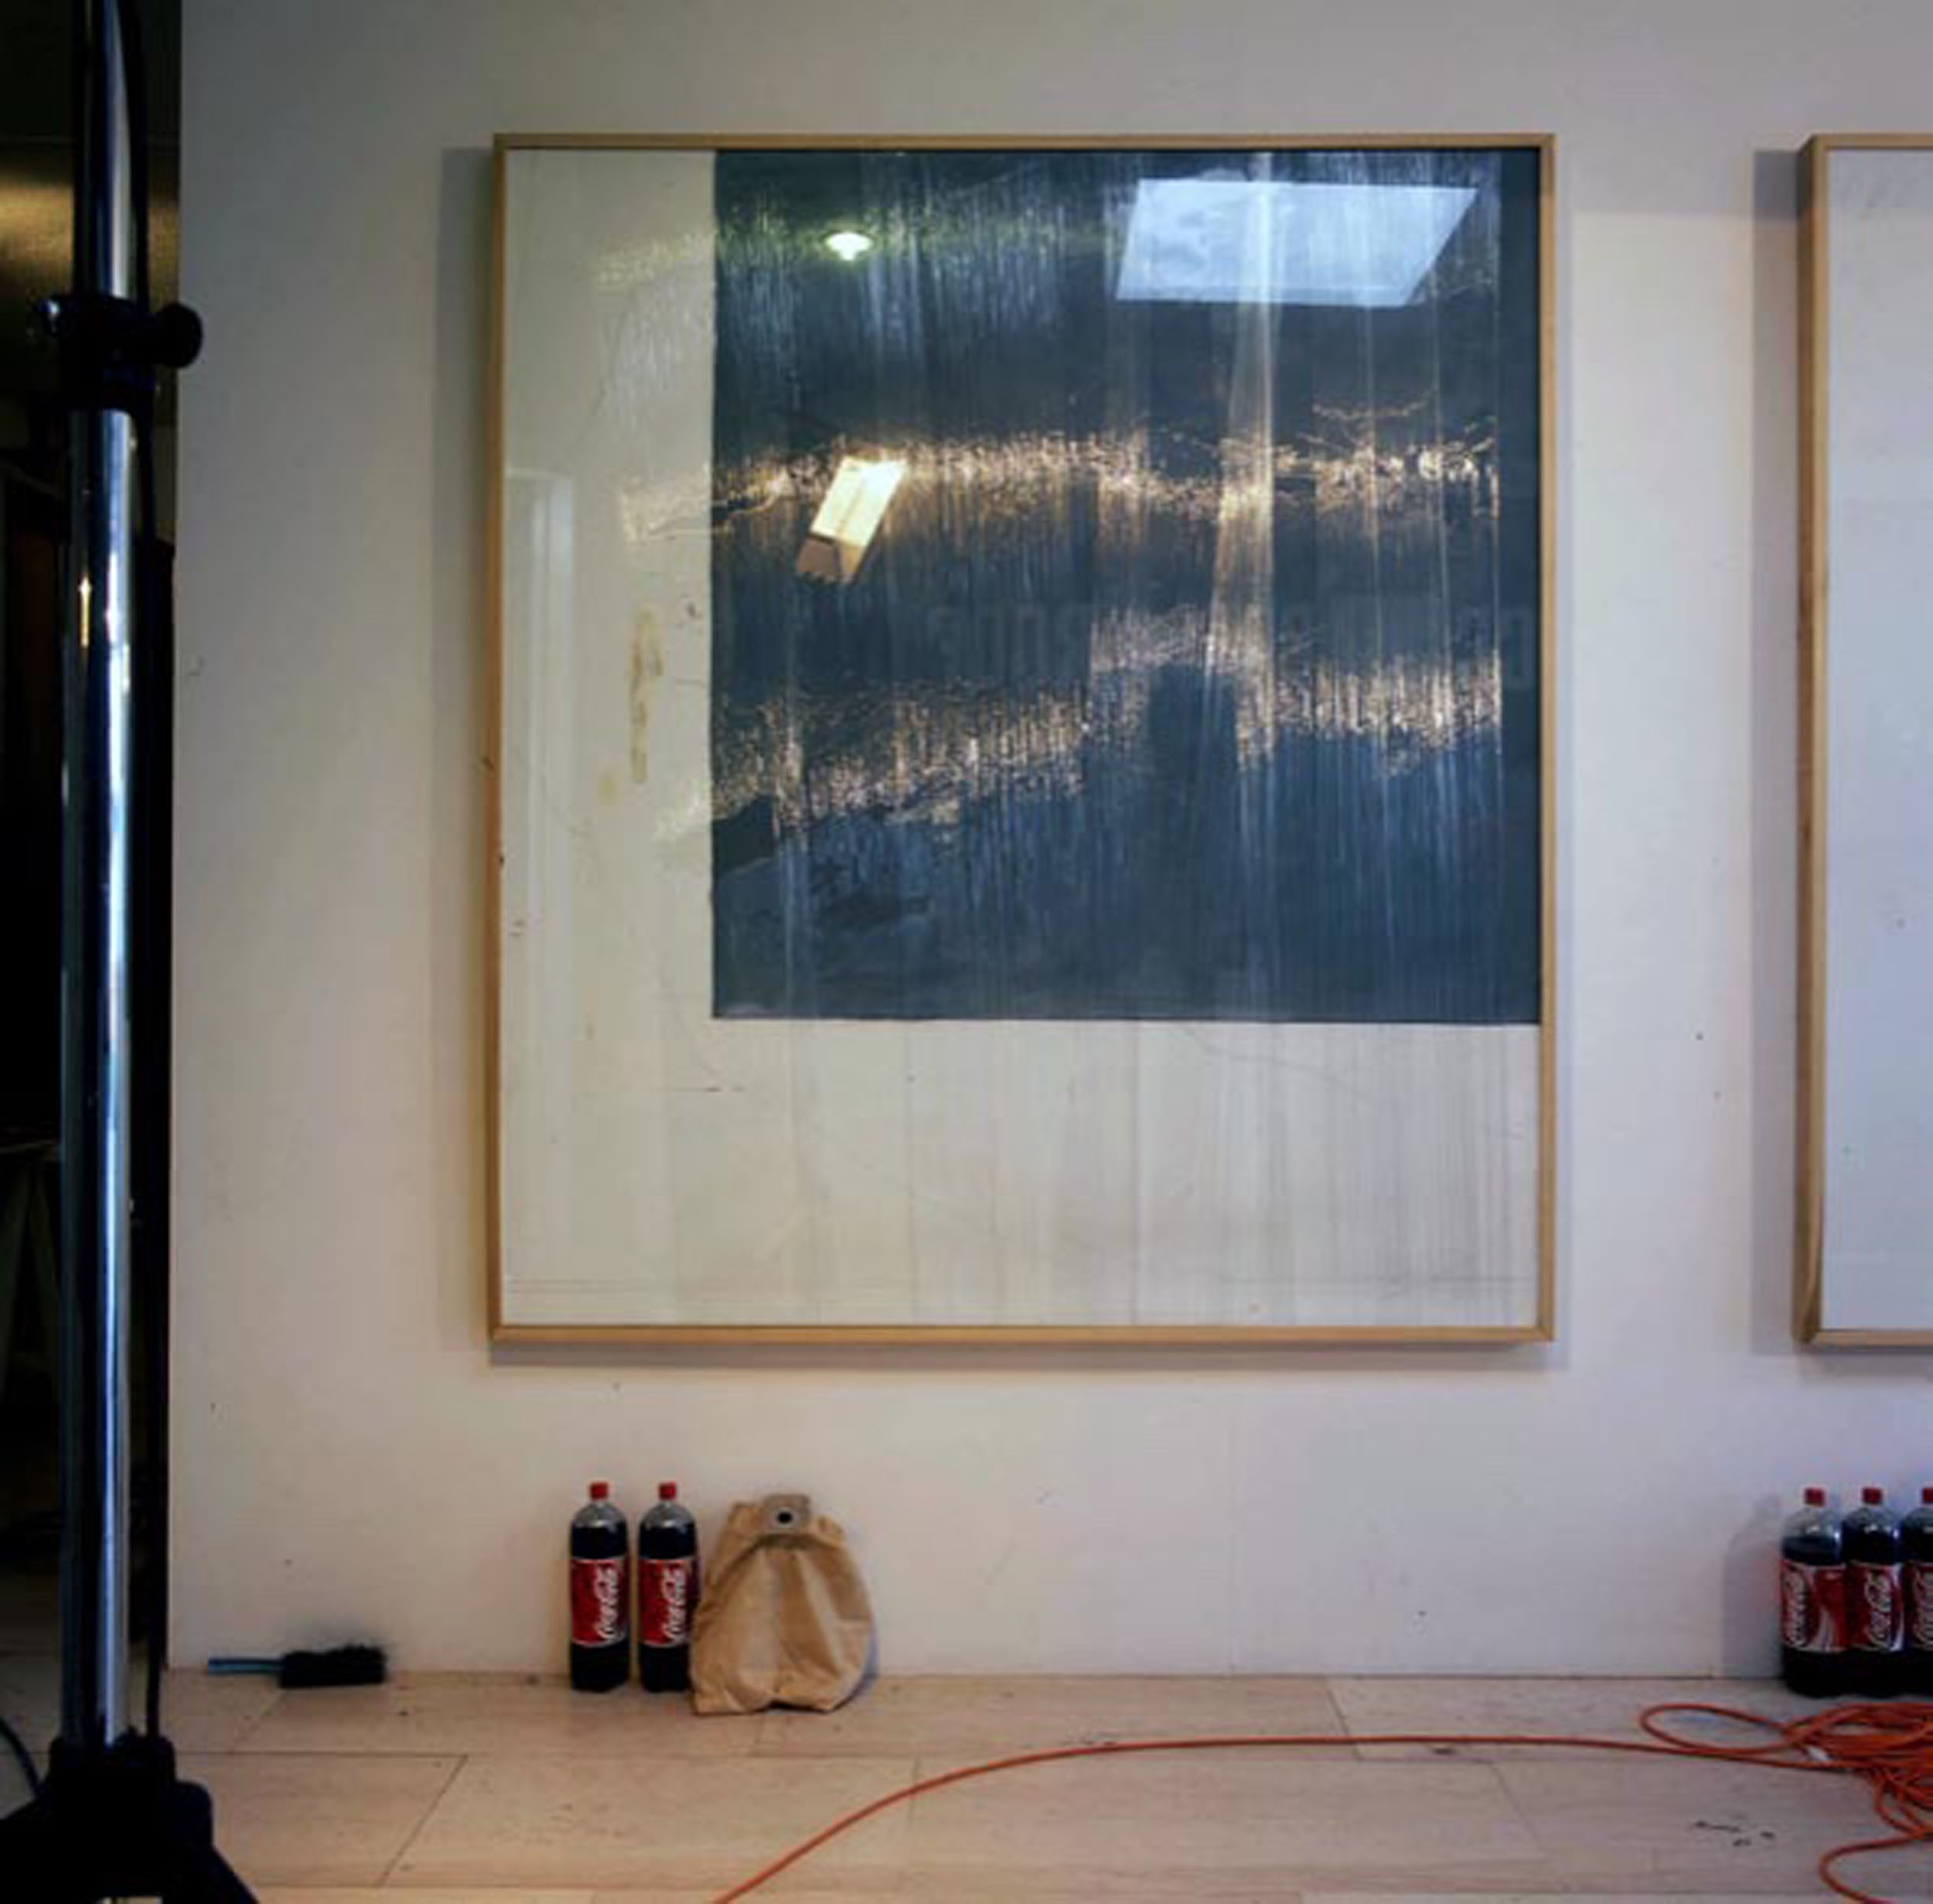 Artwork by Matthieu Ronsse, Untitled (Grey and white), Made of Oil on canvas and plastic sheets